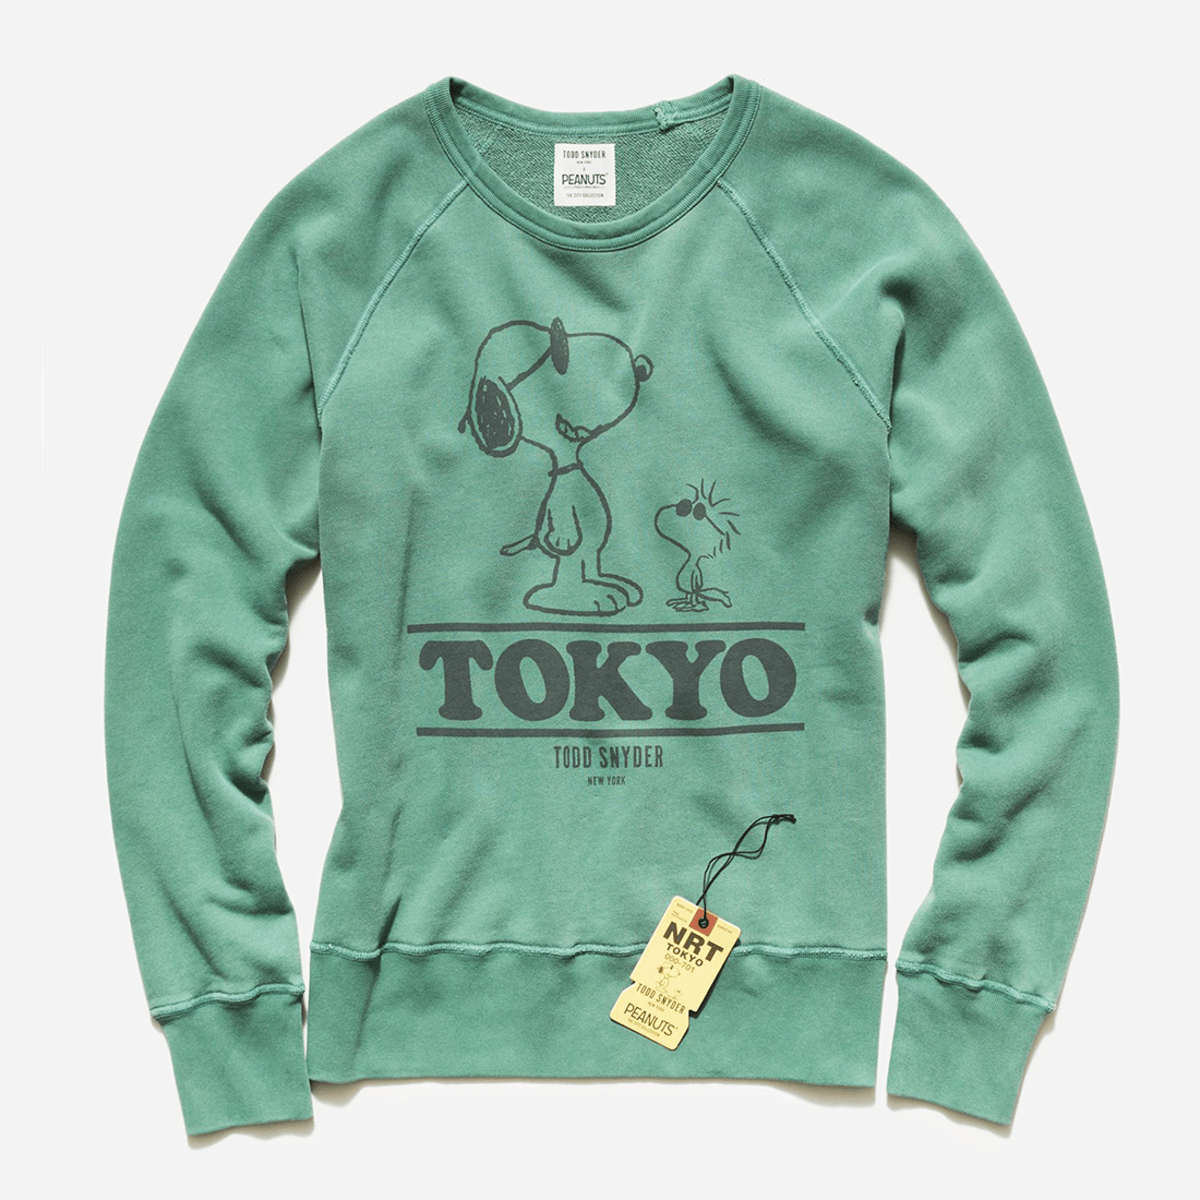 Todd Snyder x Peanuts French Terry New York Hoodie